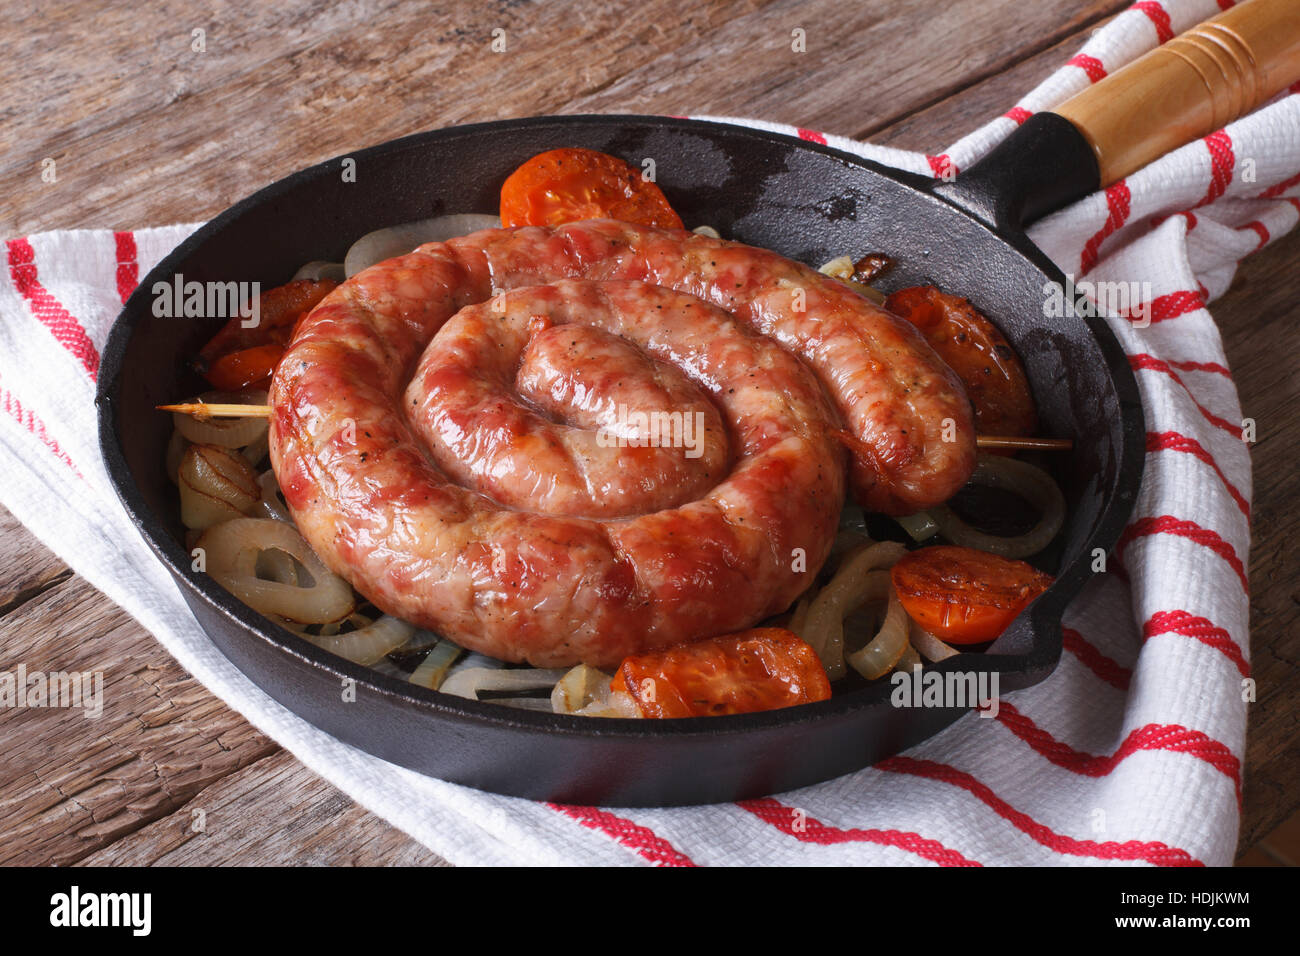 Fried sausage with onions and tomatoes in a pan closeup, rustic style Stock Photo